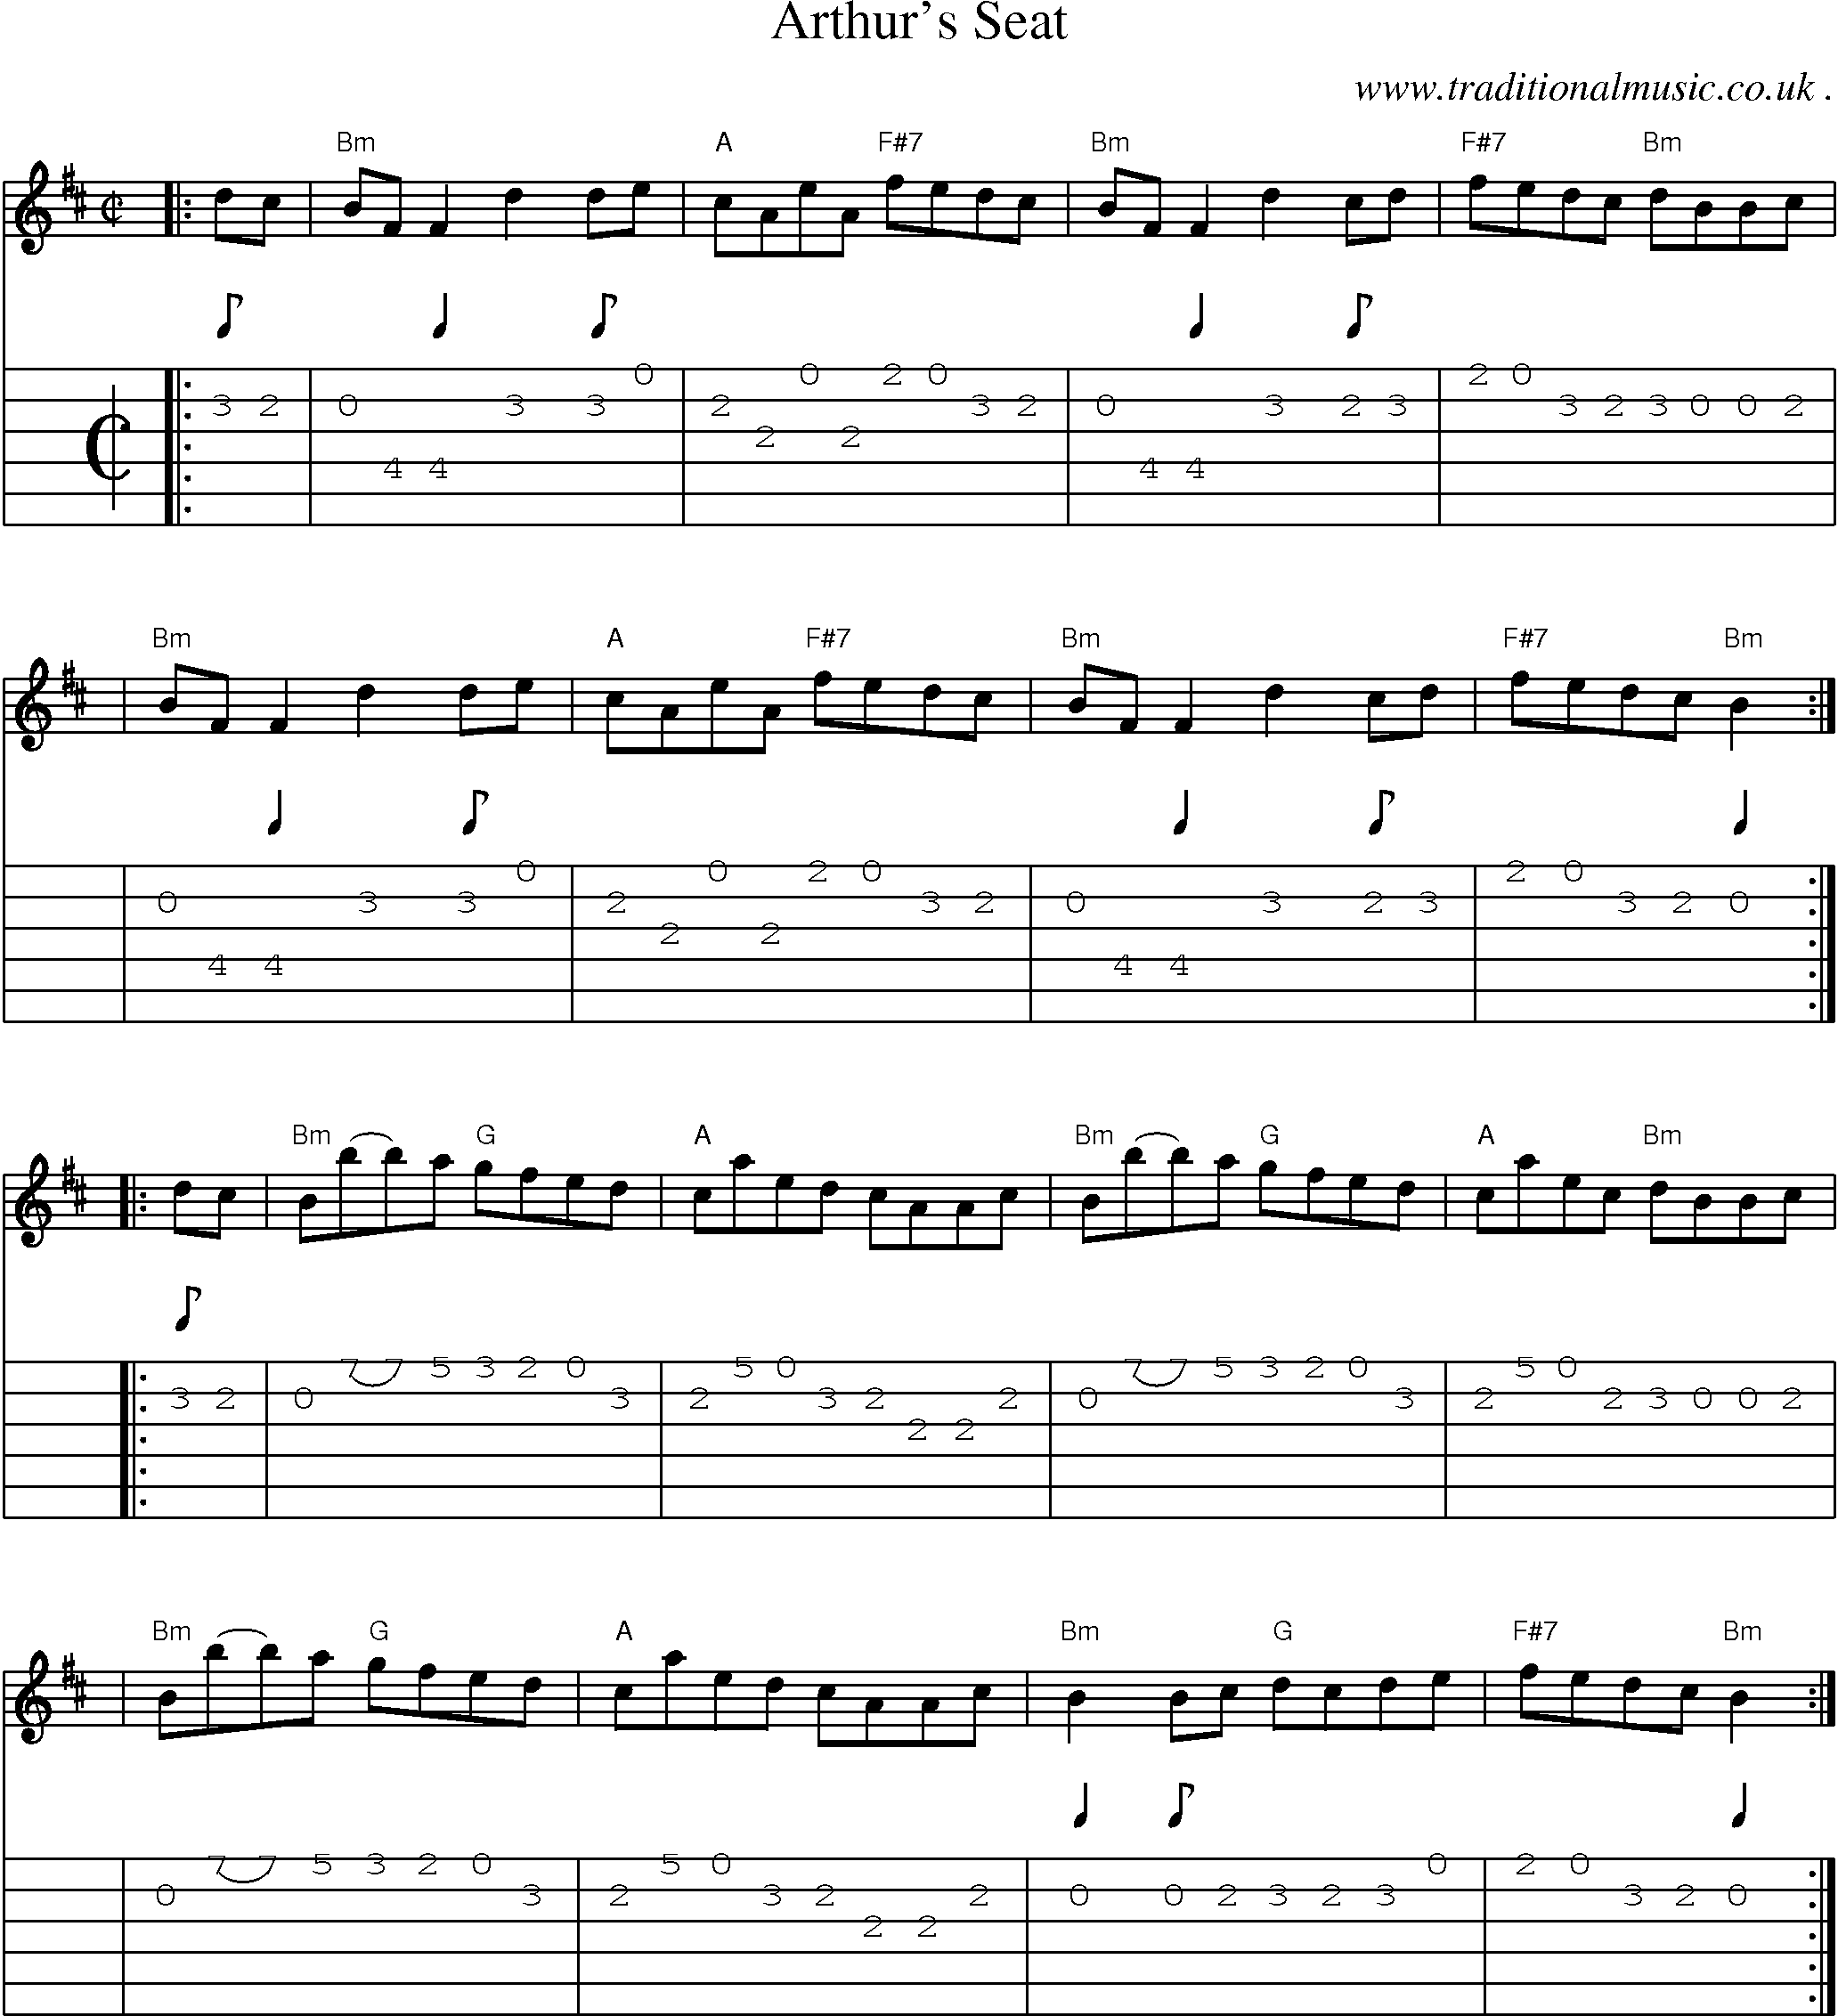 Sheet-music  score, Chords and Guitar Tabs for Arthurs Seat